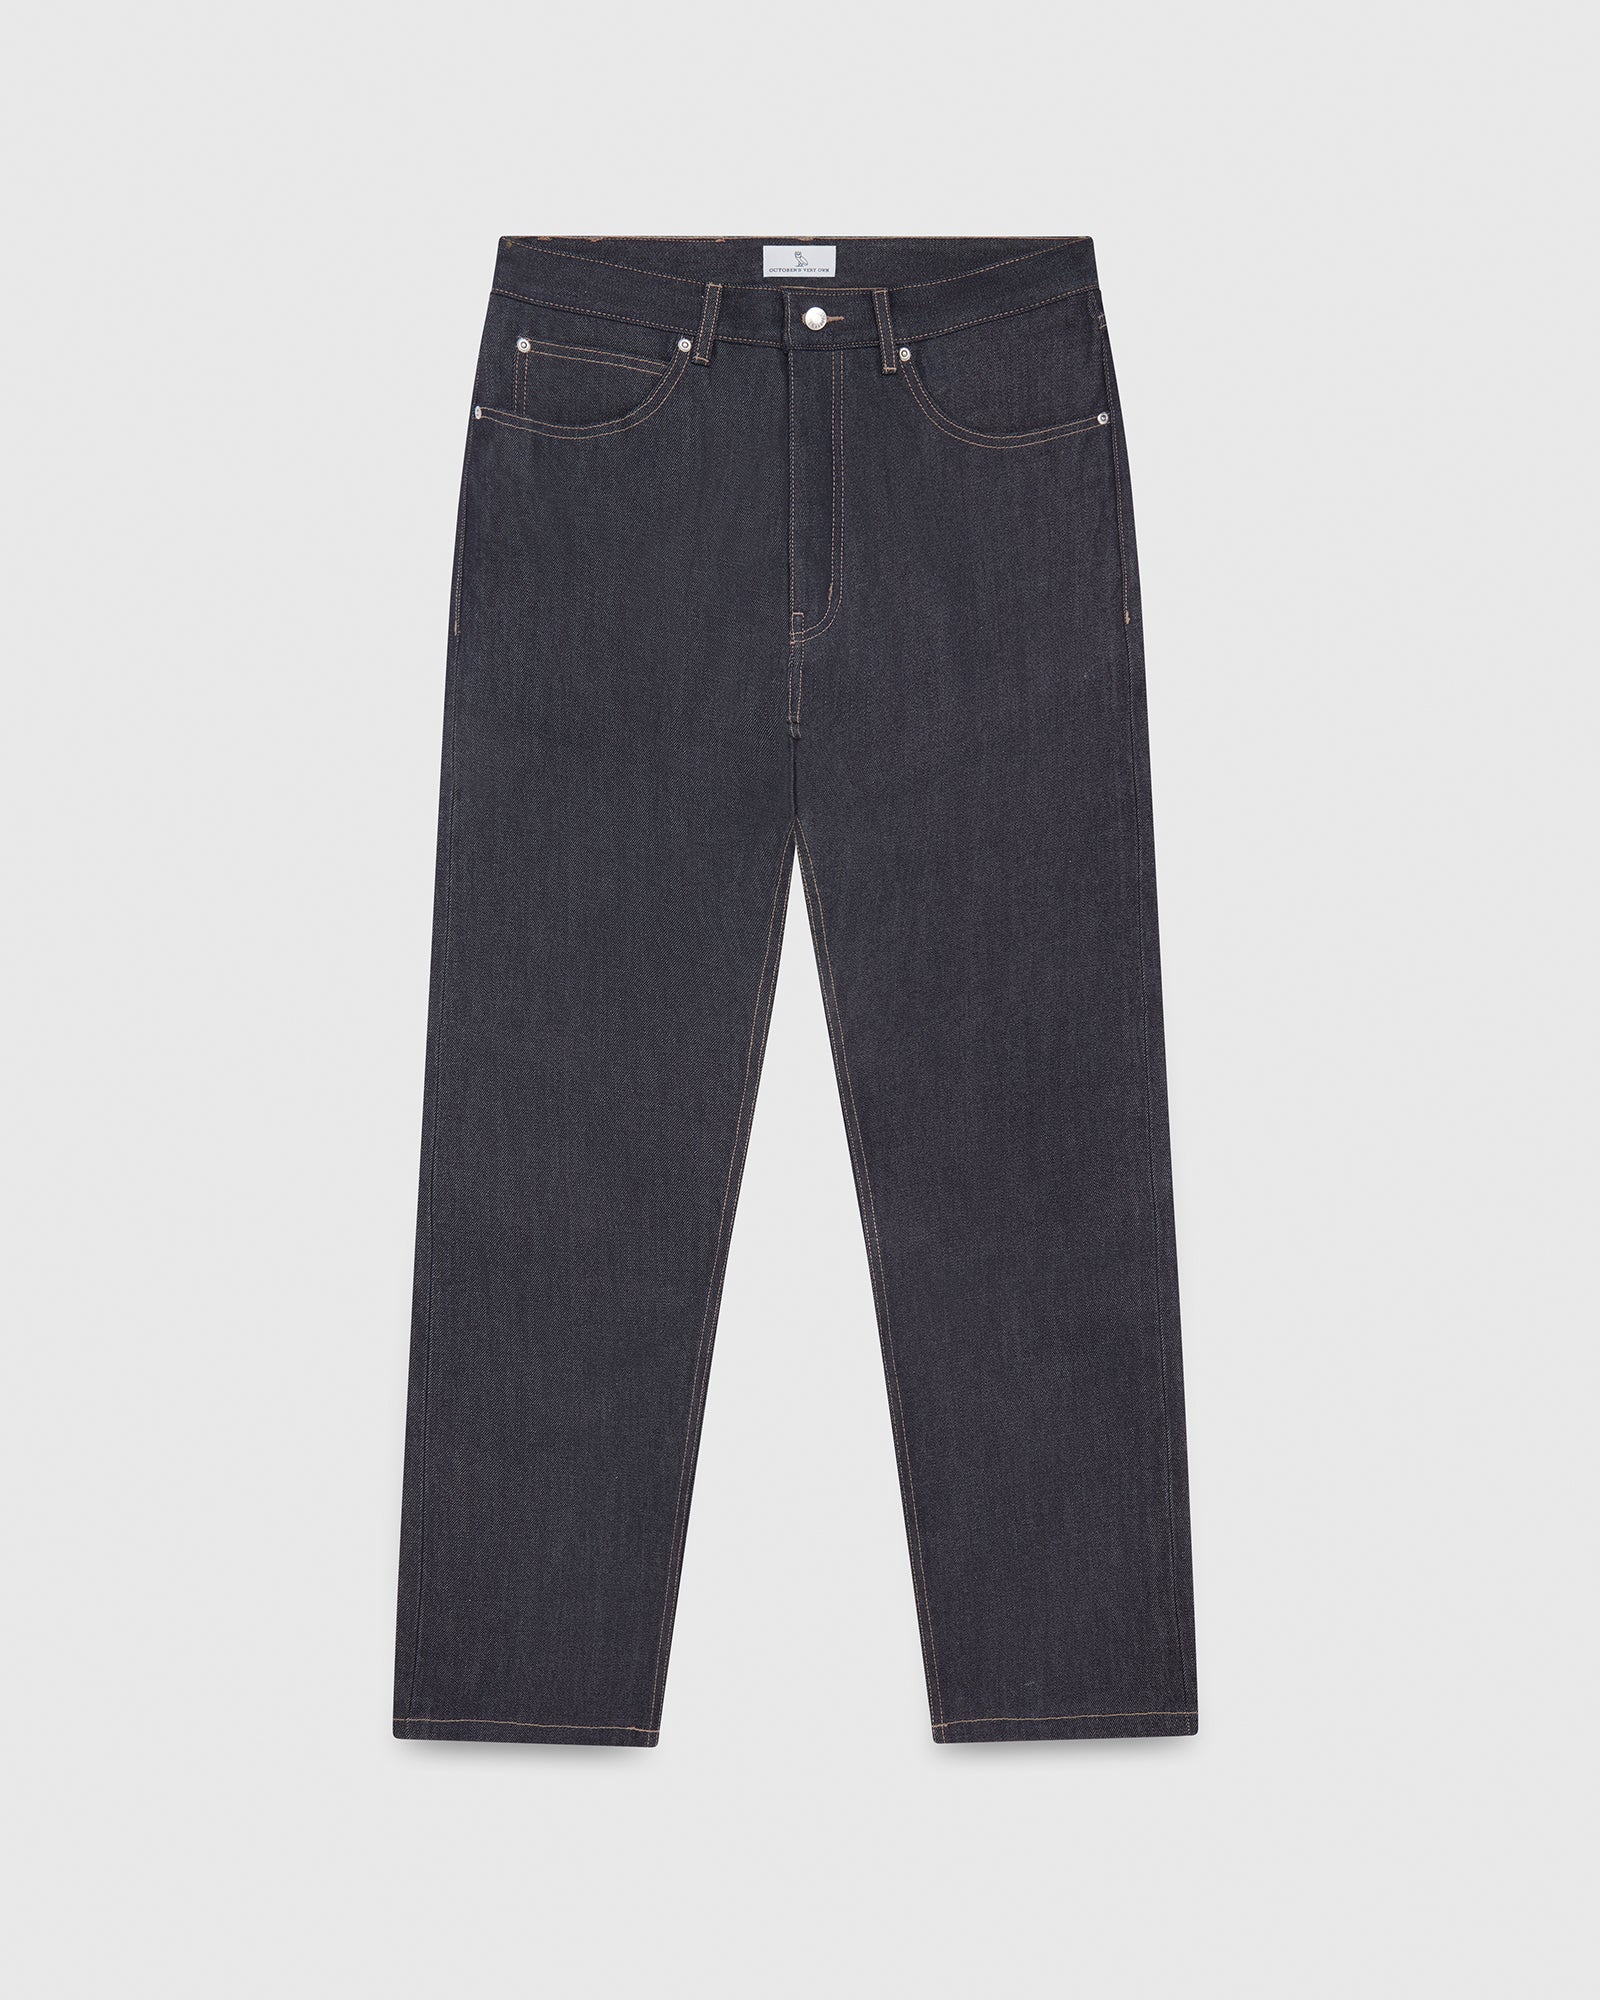 5 Pocket Relaxed Fit Jean - Raw Indigo